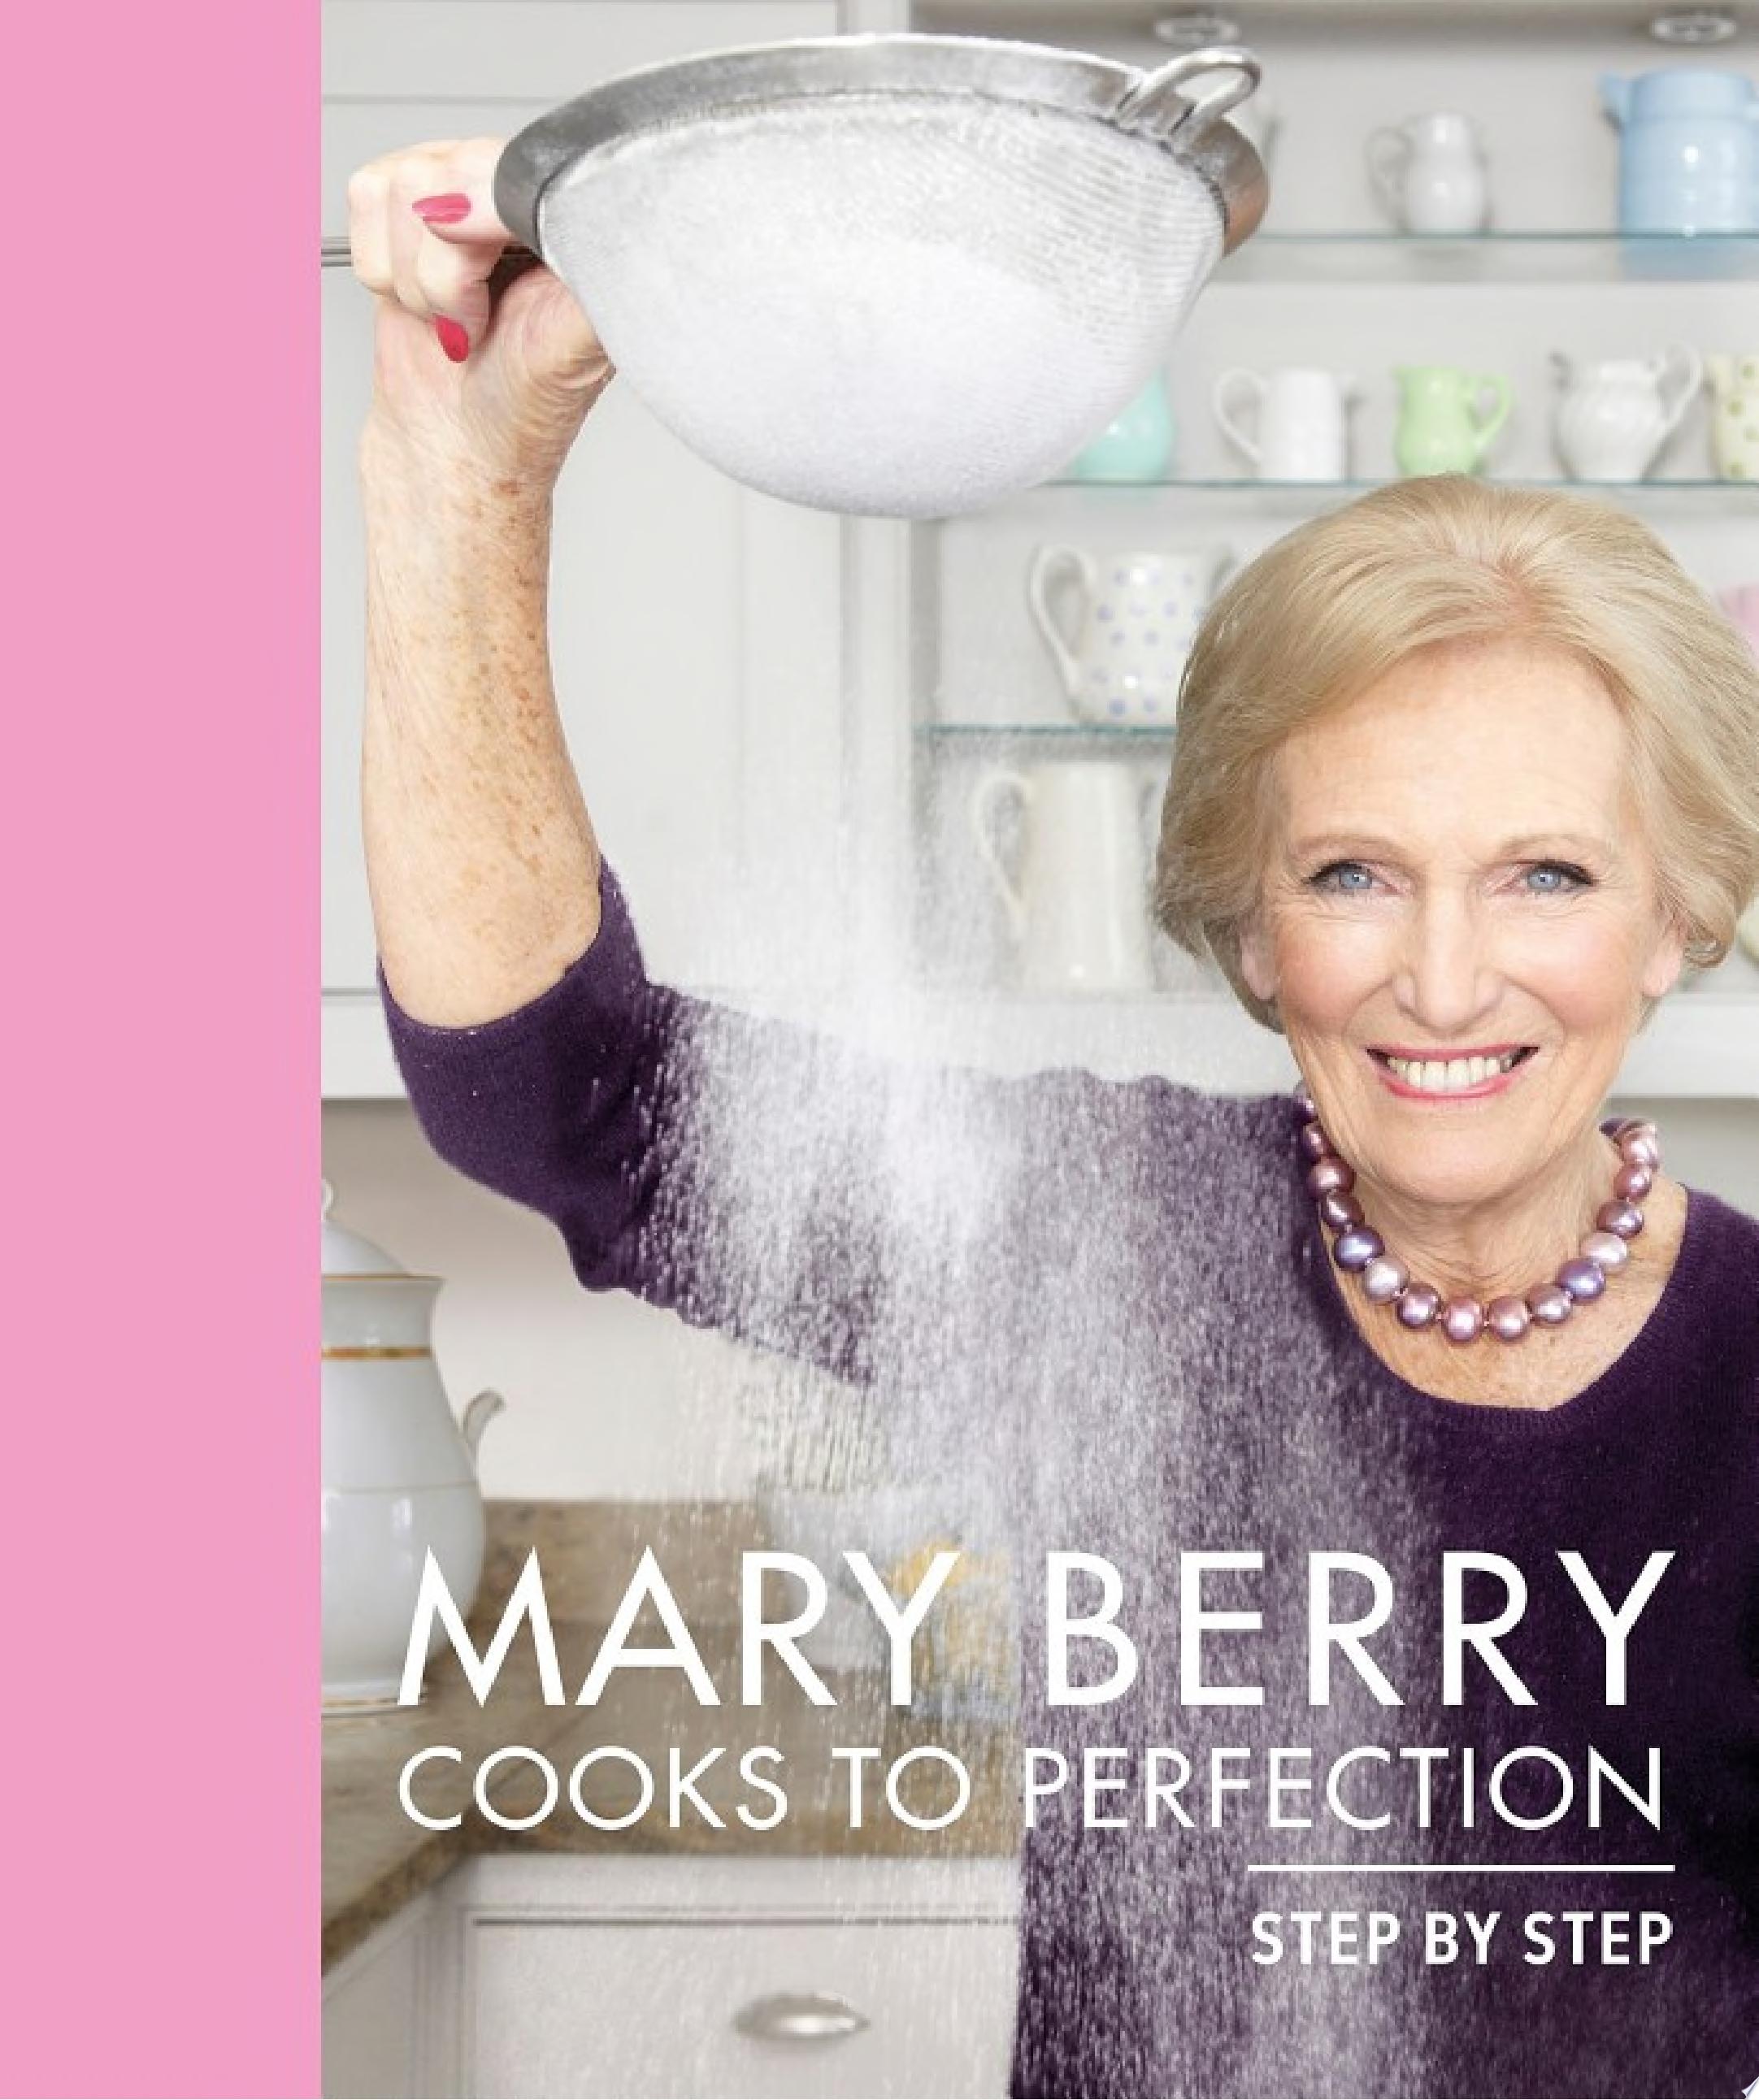 Image for "Mary Berry Cooks to Perfection"